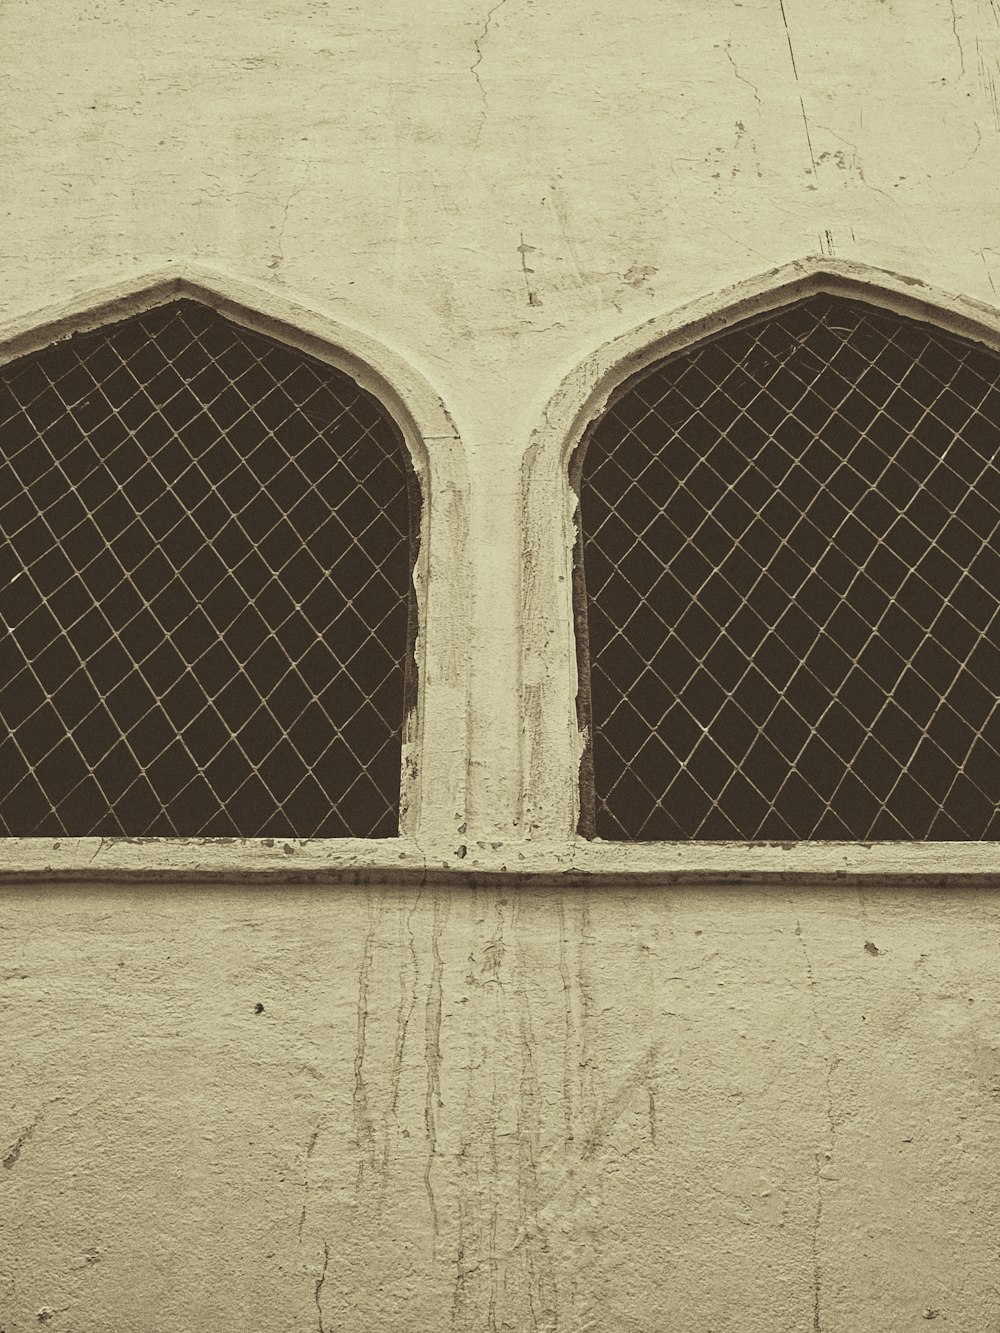 a window with two arched windows on the side of a building